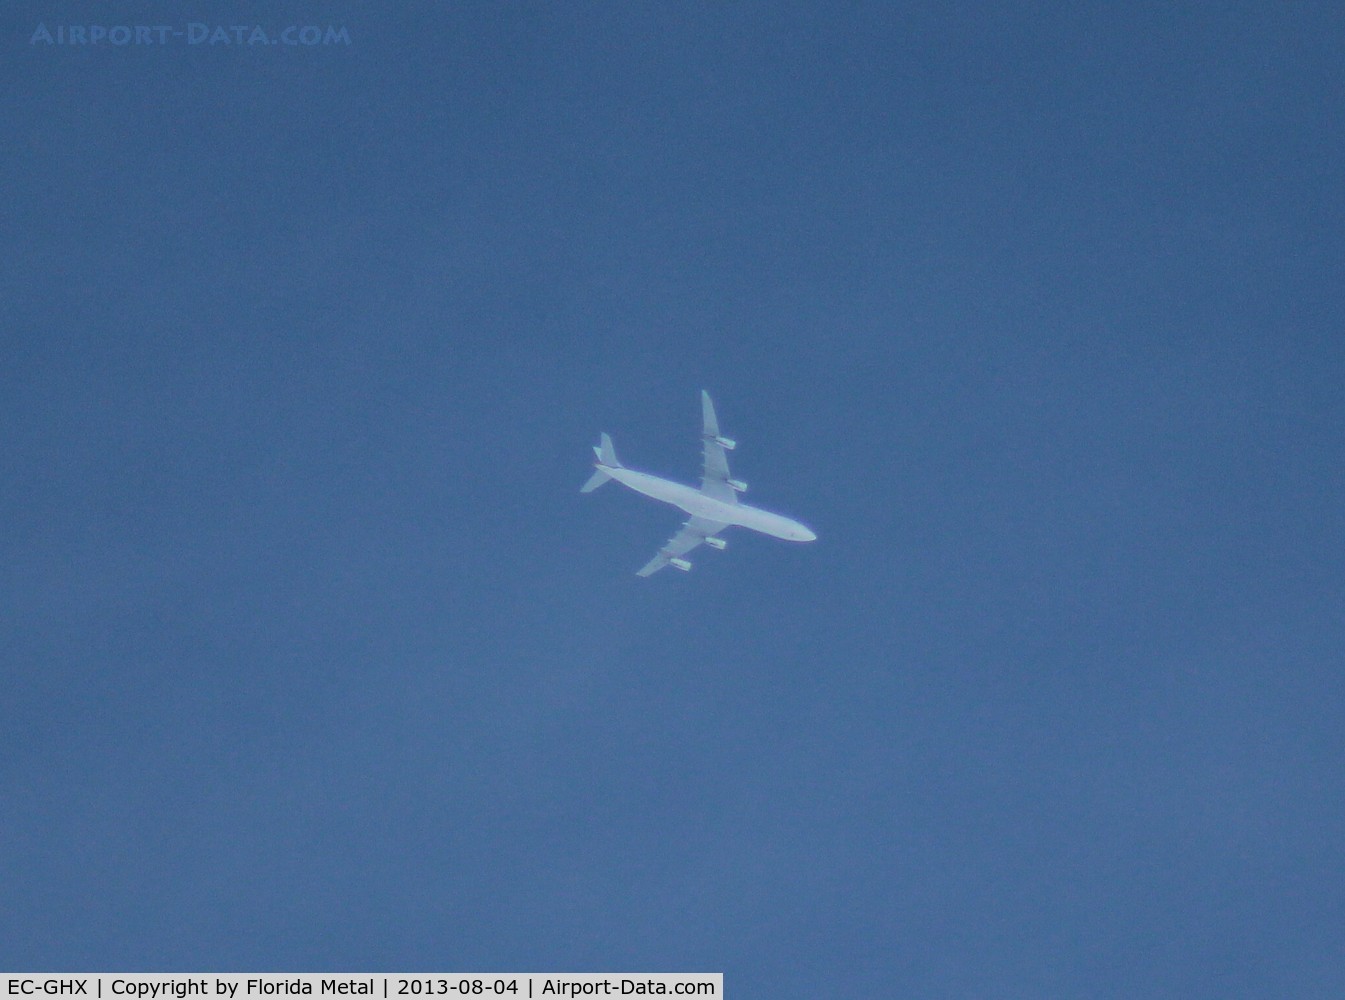 EC-GHX, 1996 Airbus A340-313 C/N 134, Iberia A340-300 overflying Livonia Michigan at 32,000 ft ORD-MAD